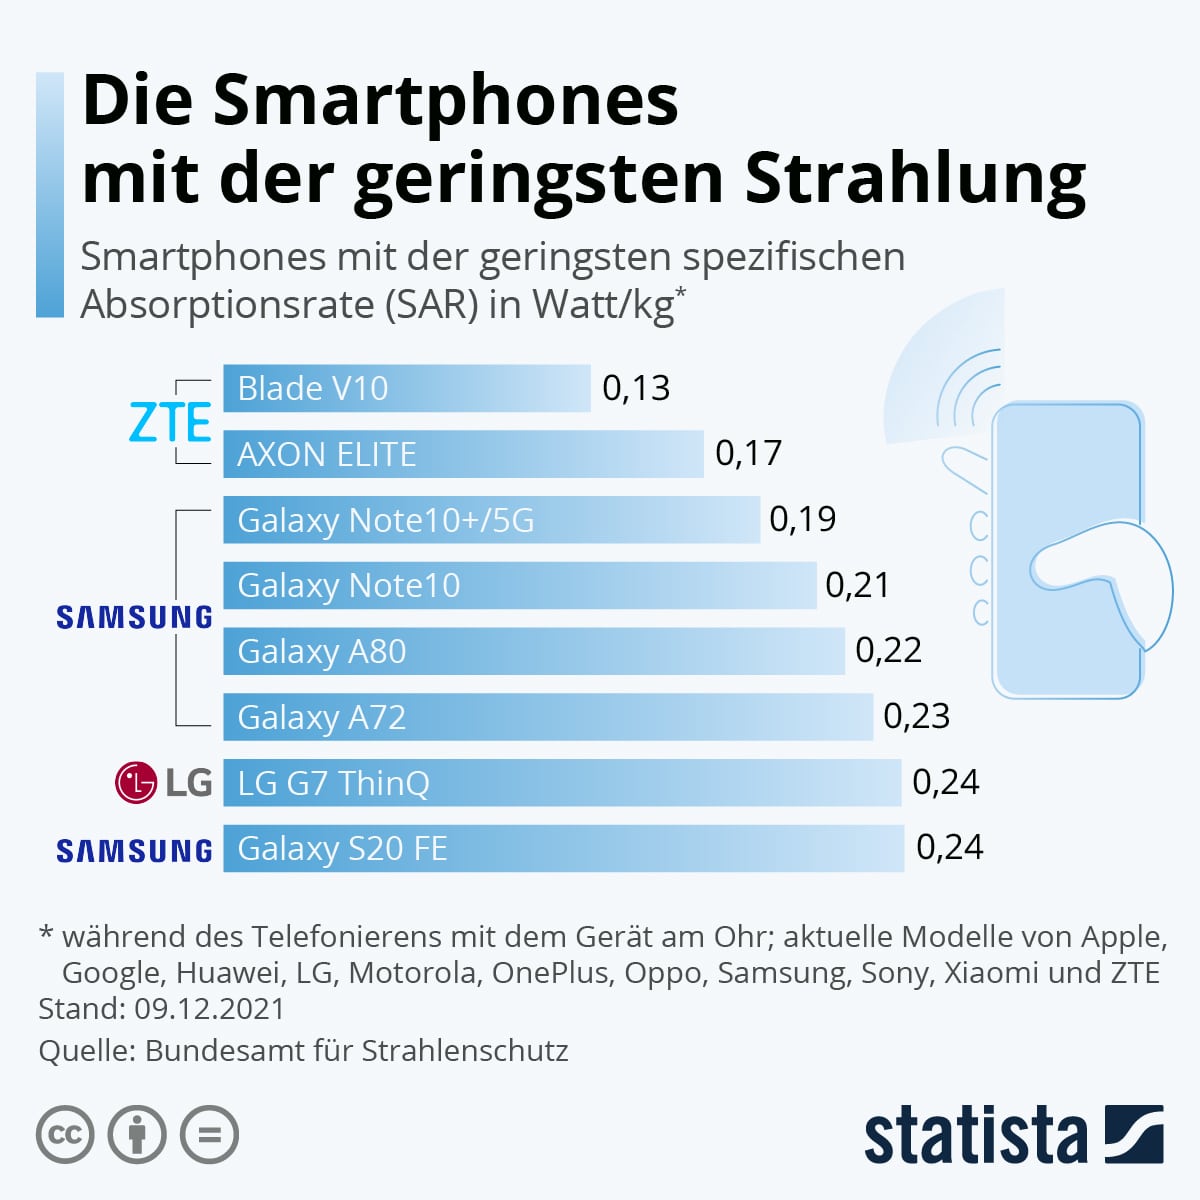 smartphone strahlung 2021 top 10